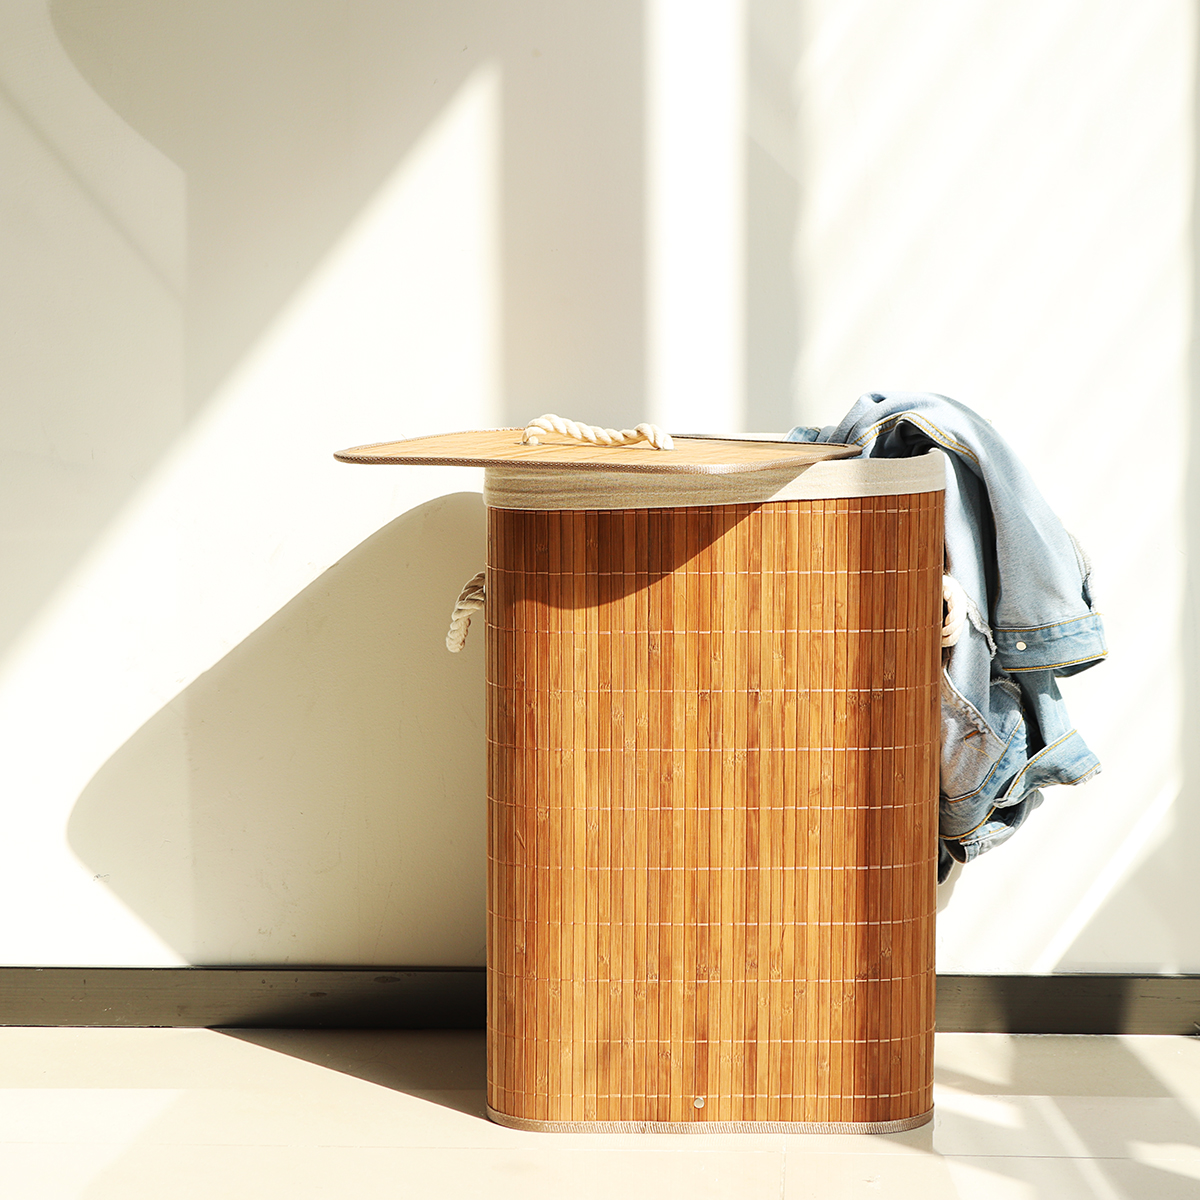 Folding-Bamboo-Laundry-Basket-with-Lid-Removable-Bag-Dirty-Clothes-Storage-1854896-18